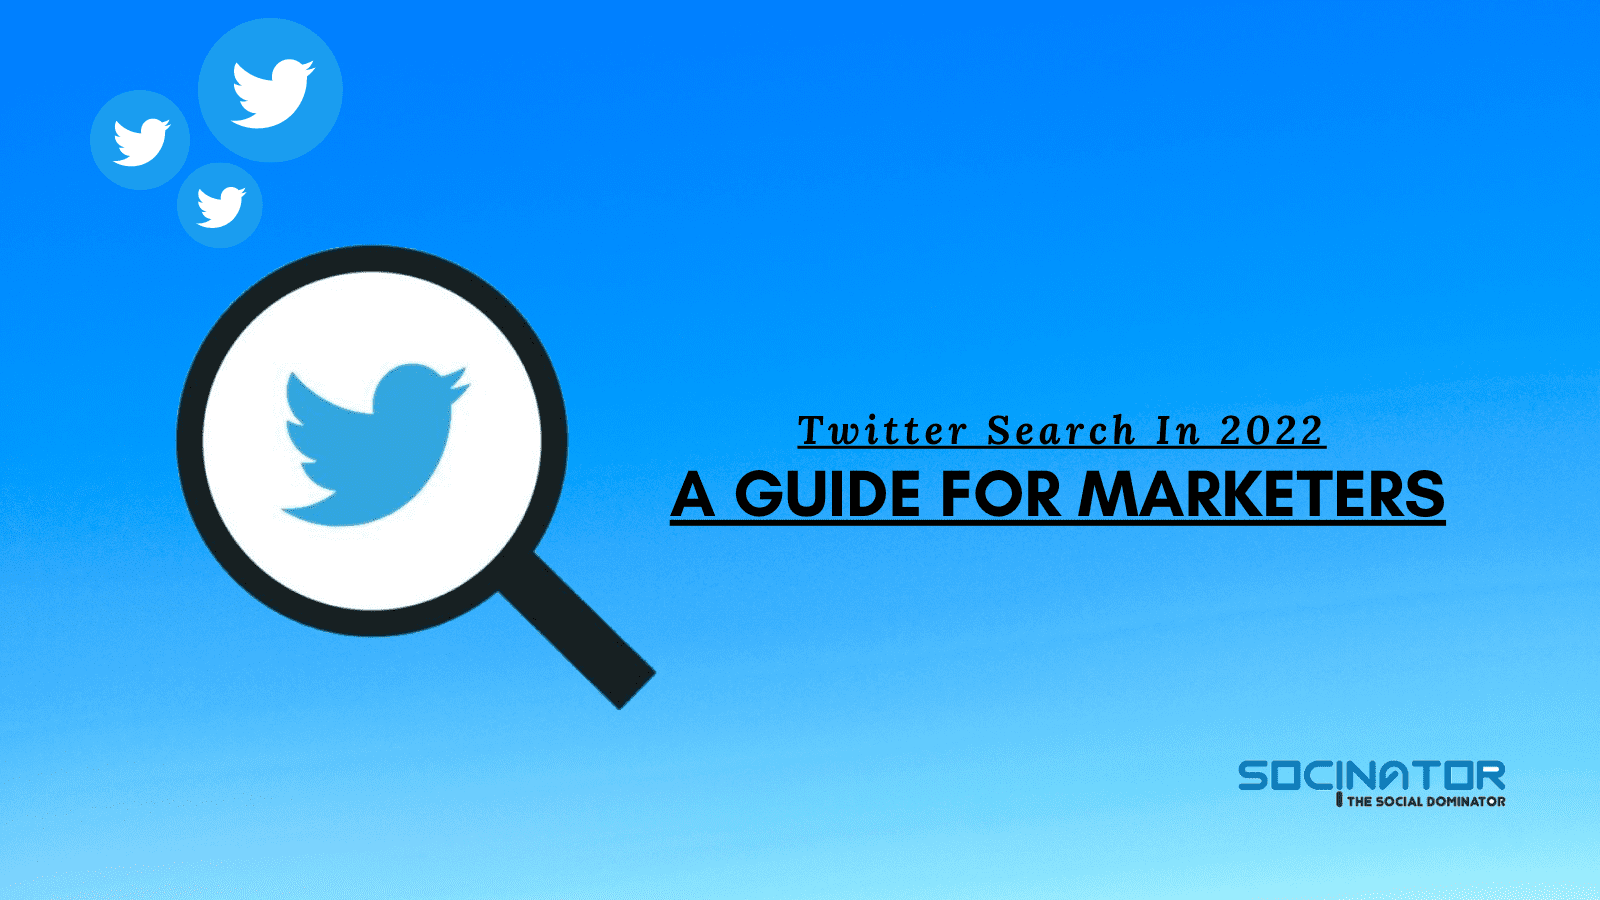 Twitter Search In 2022: A Guide For Marketers